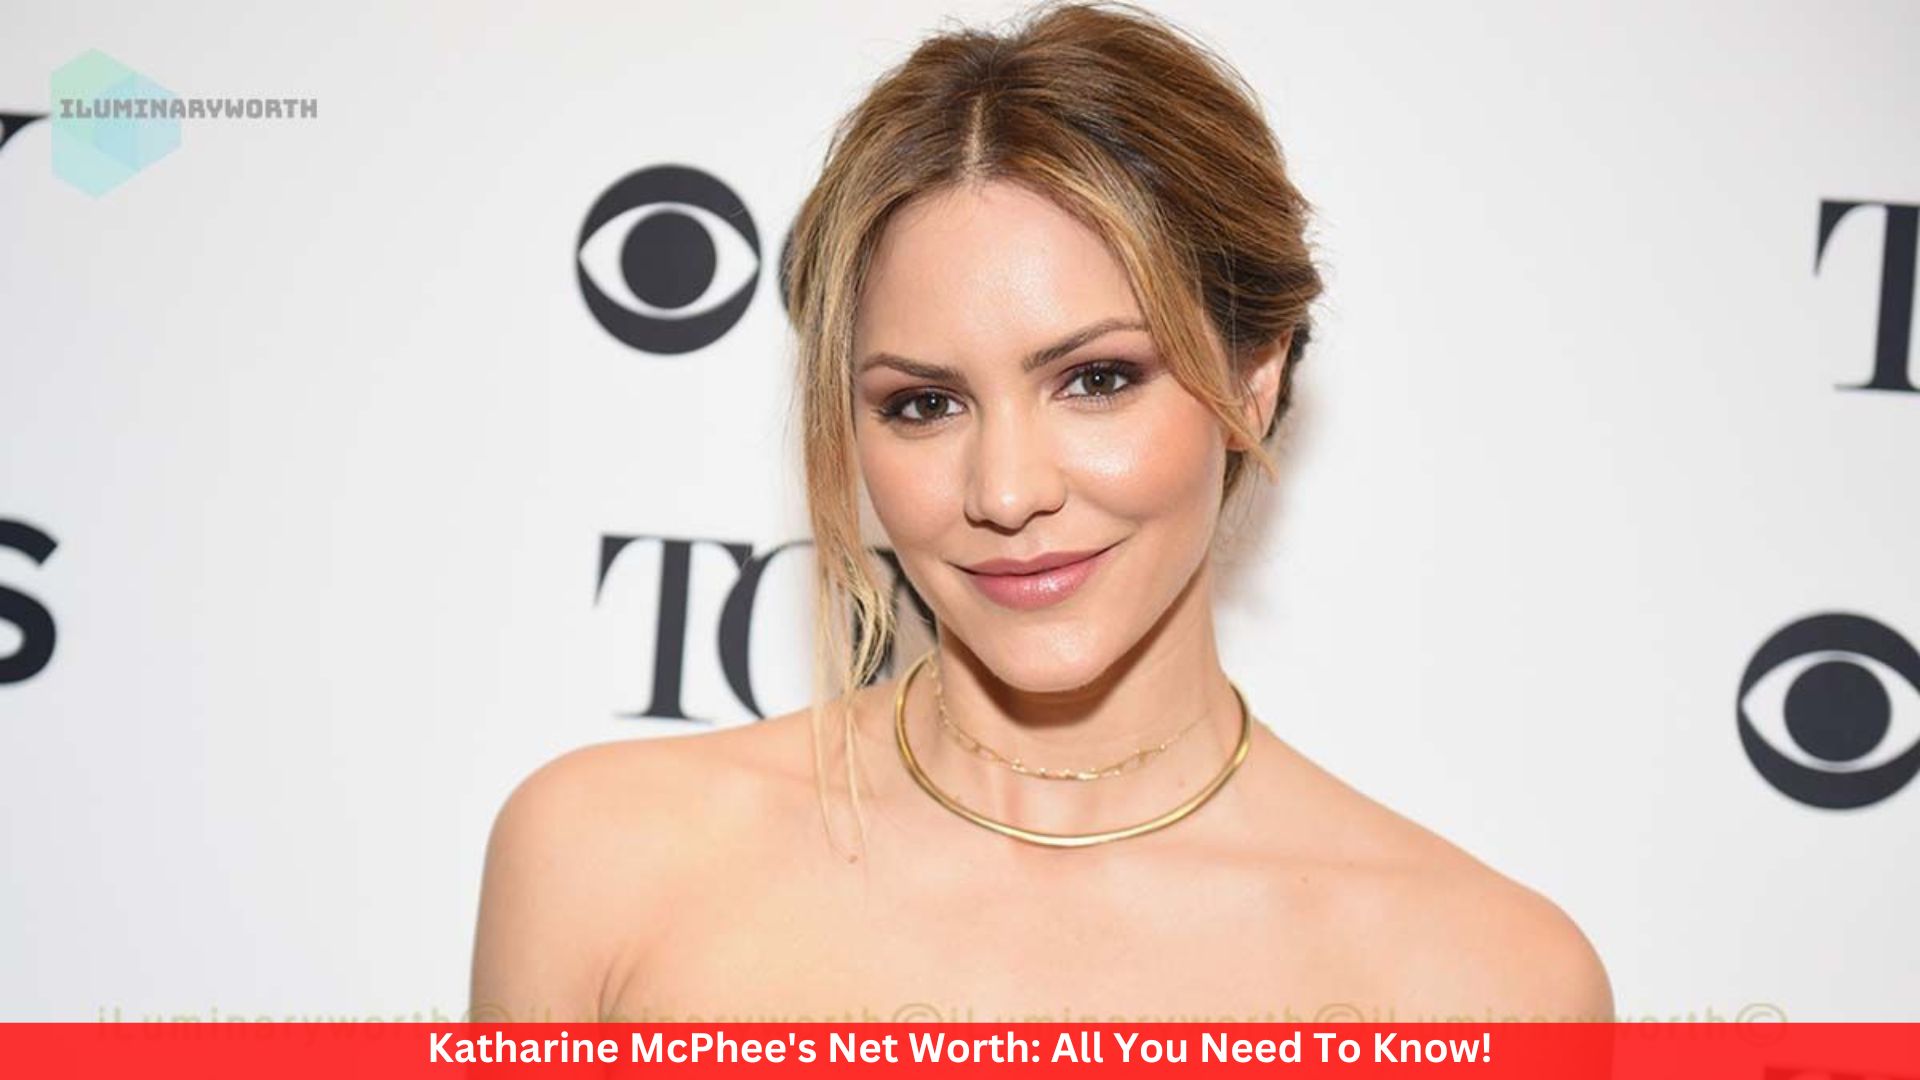 Katharine McPhee's Net Worth: All You Need To Know!